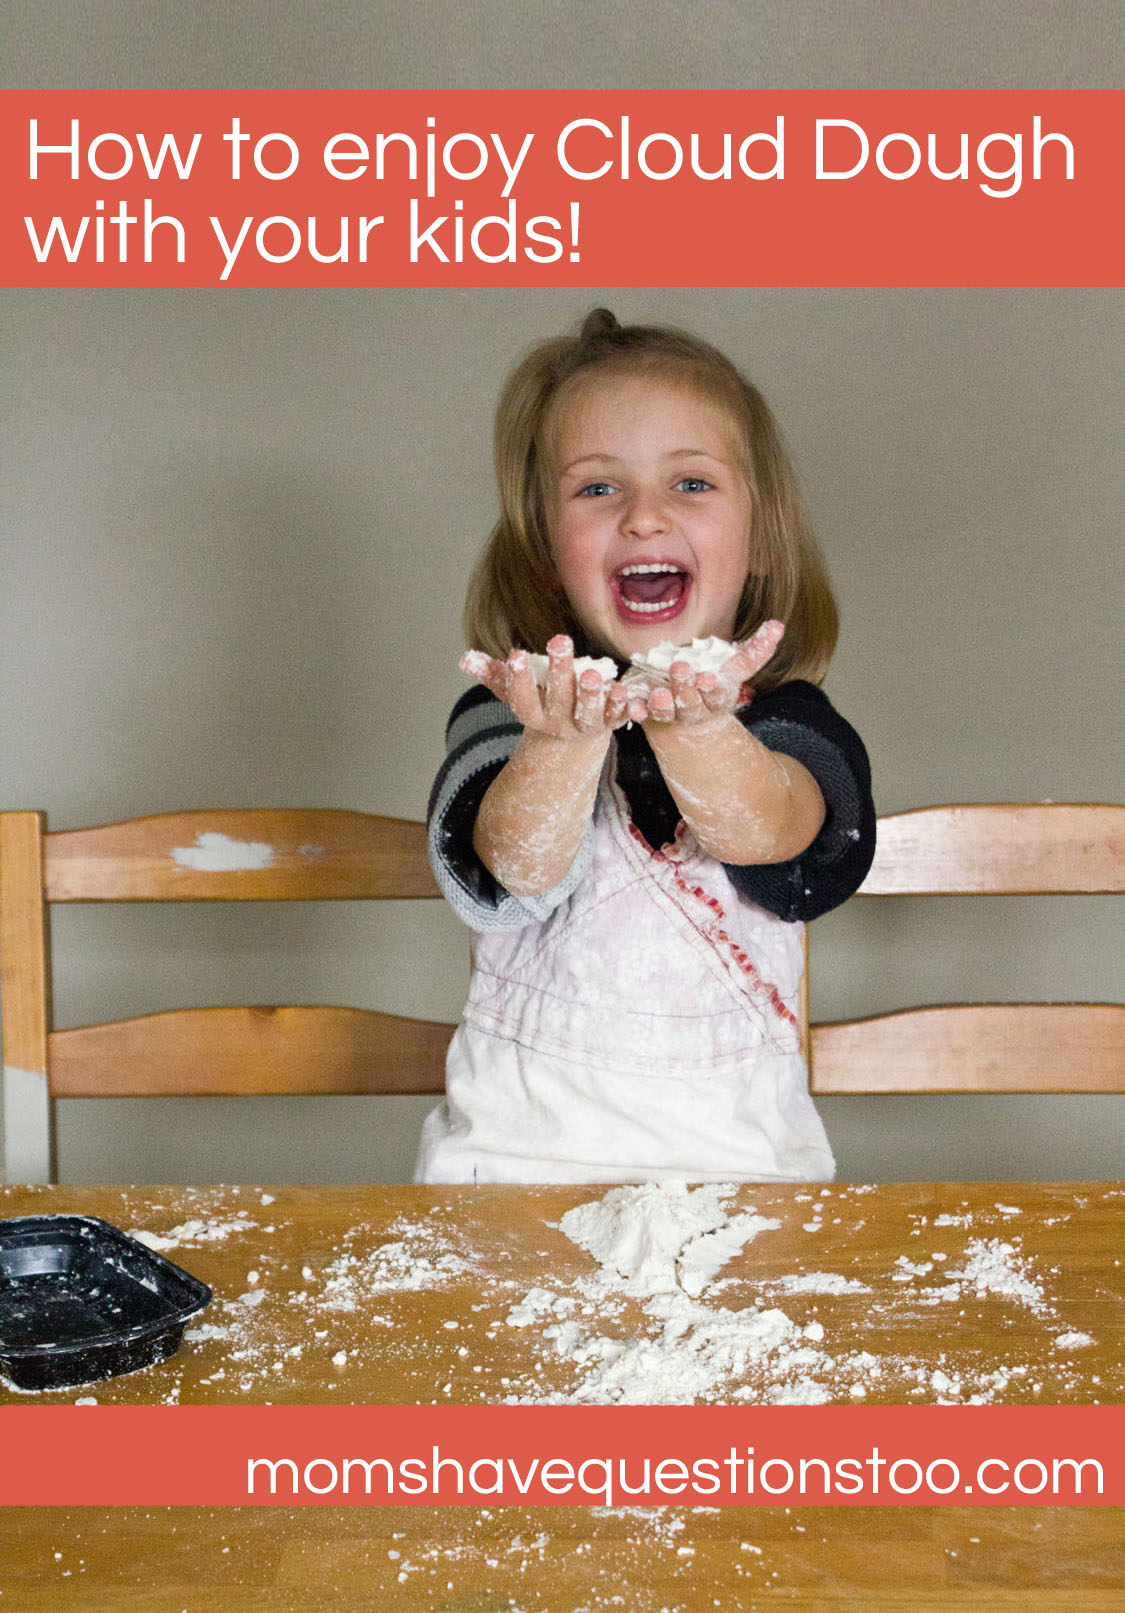 How to enjoy Cloud Dough with your kids